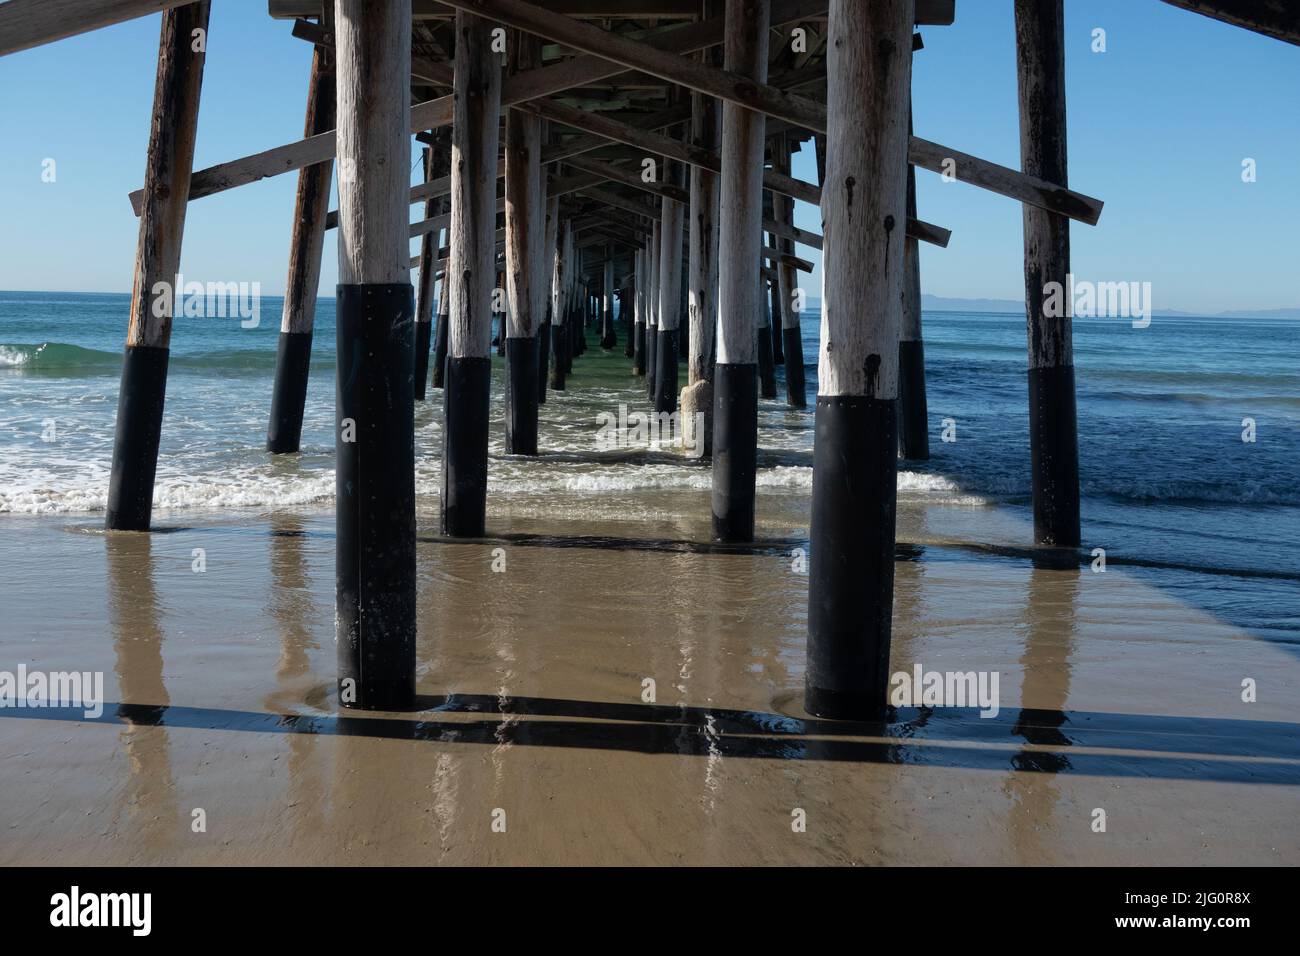 Underneath the wooden pier on Newport Beach, on the Pacific Ocean, in Southern California USA Stock Photo